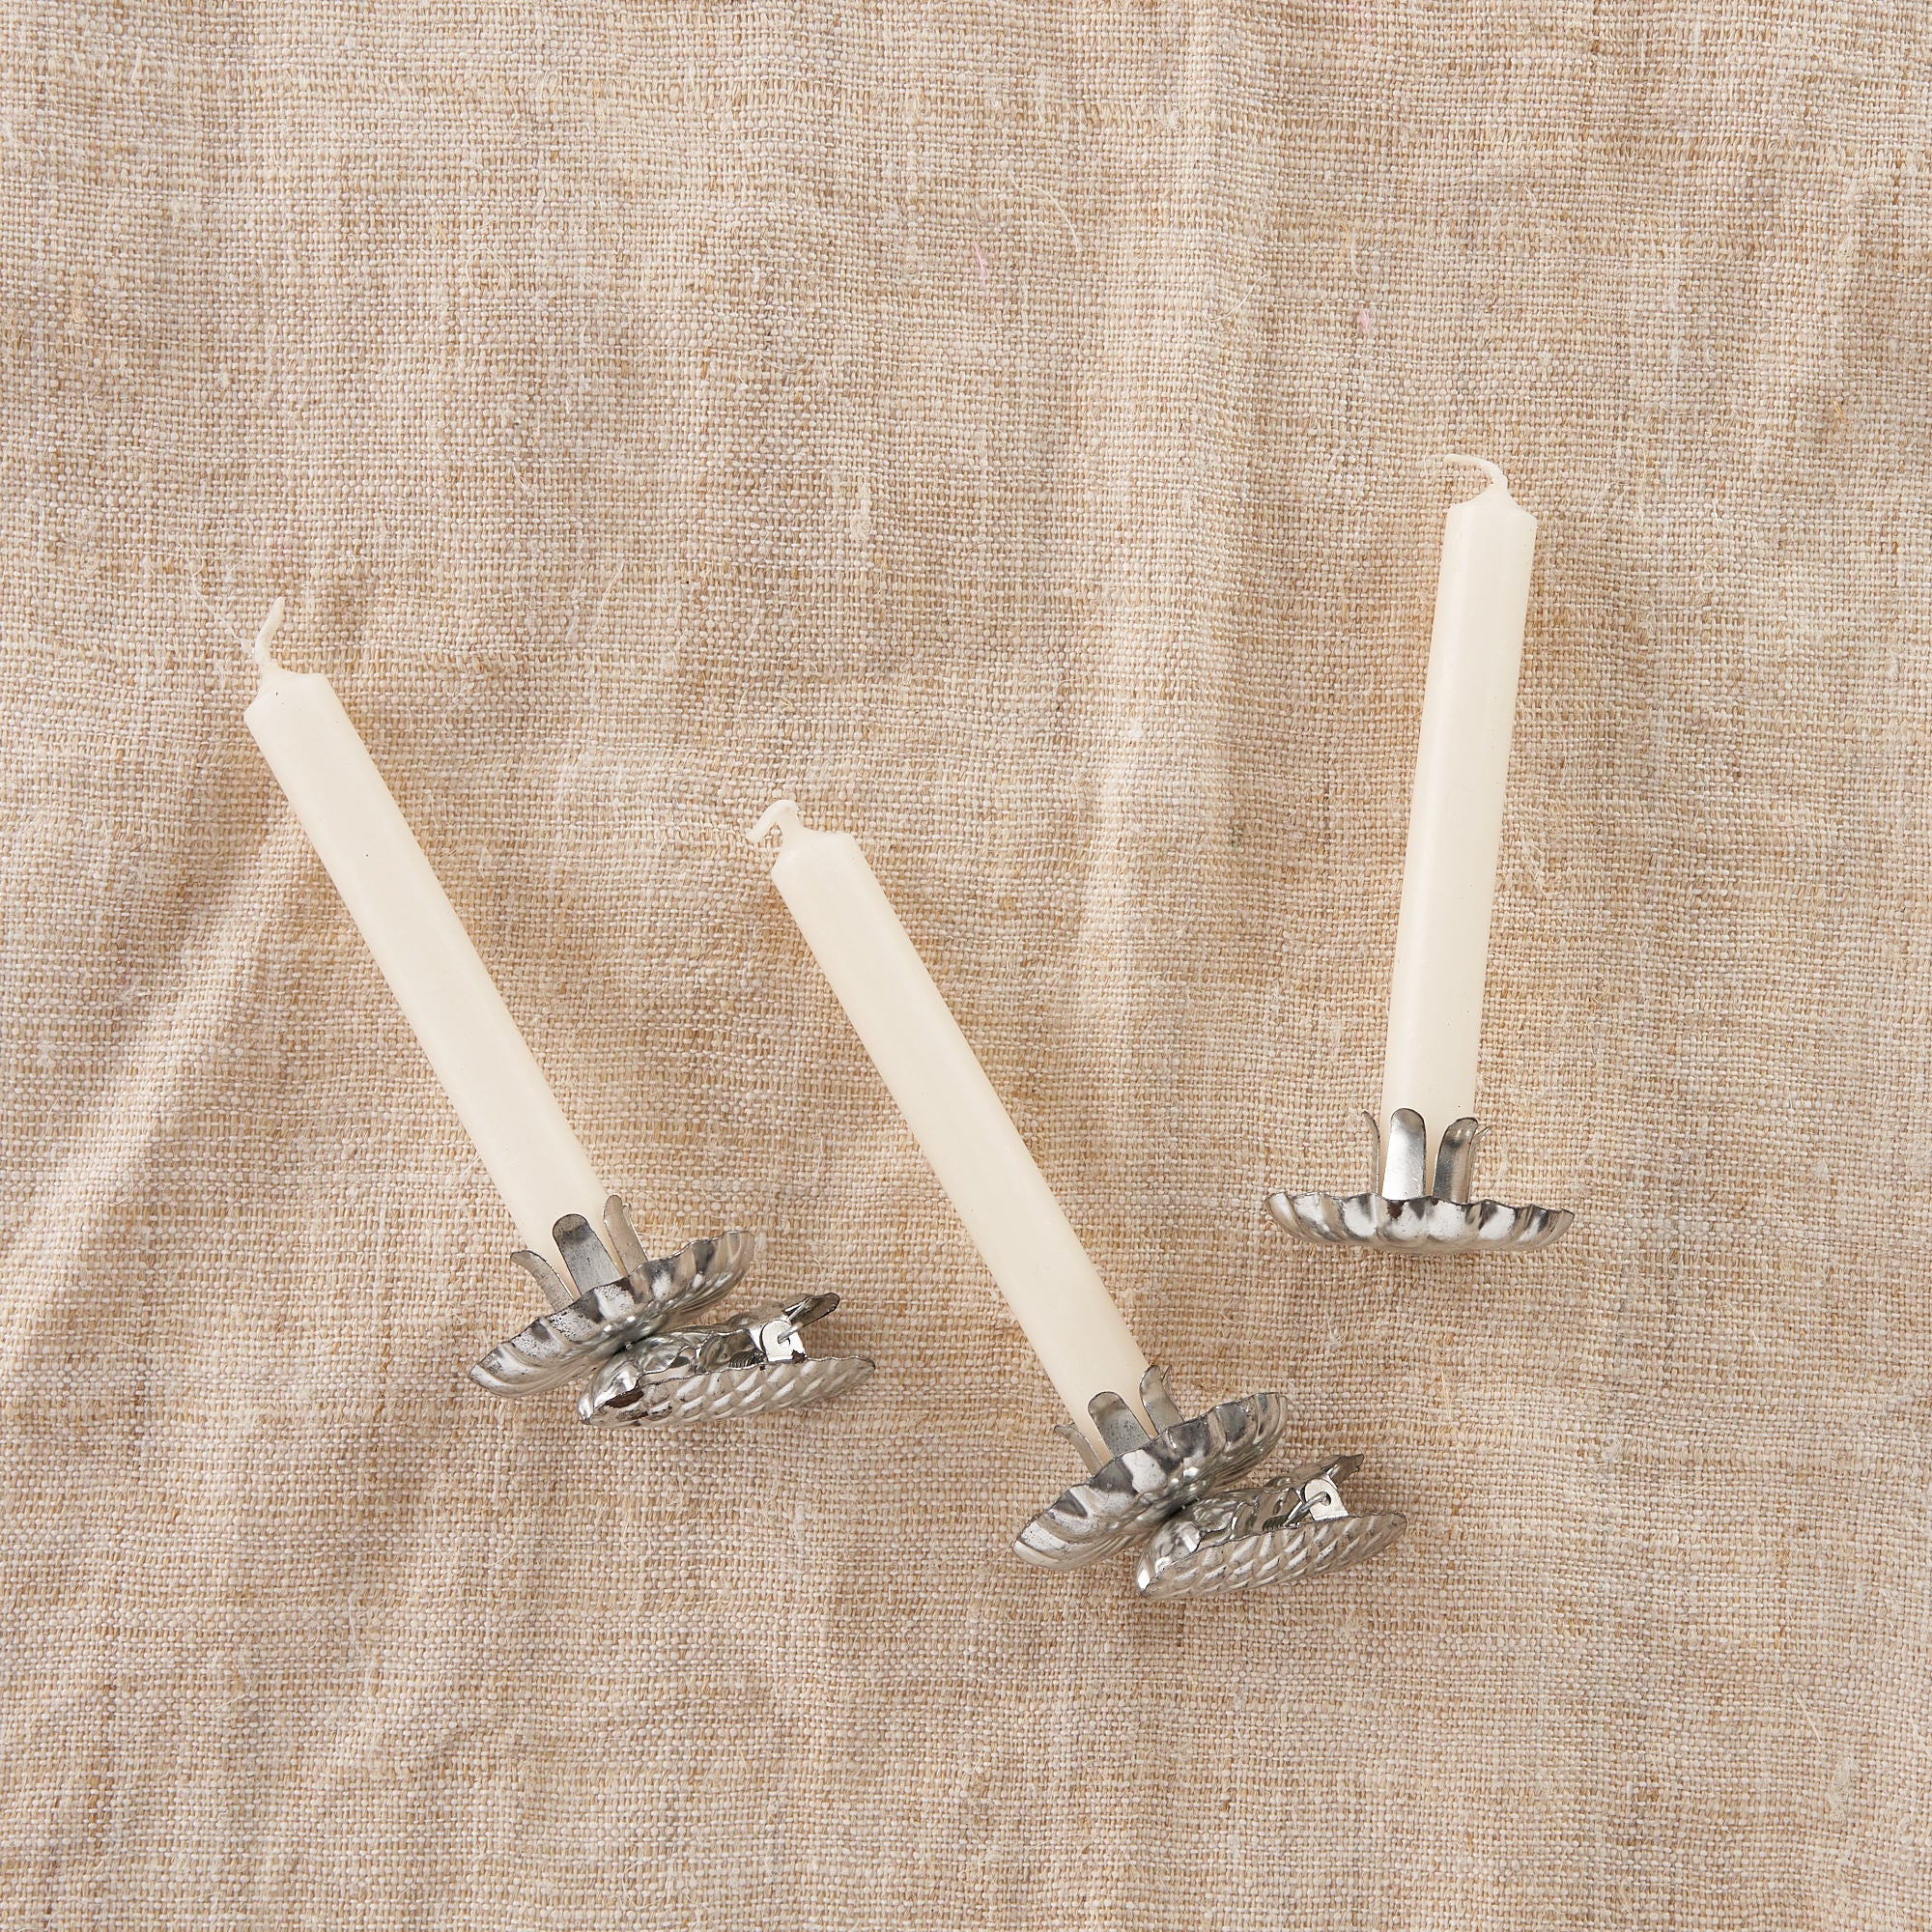 Set of vintage style tree clips with candles